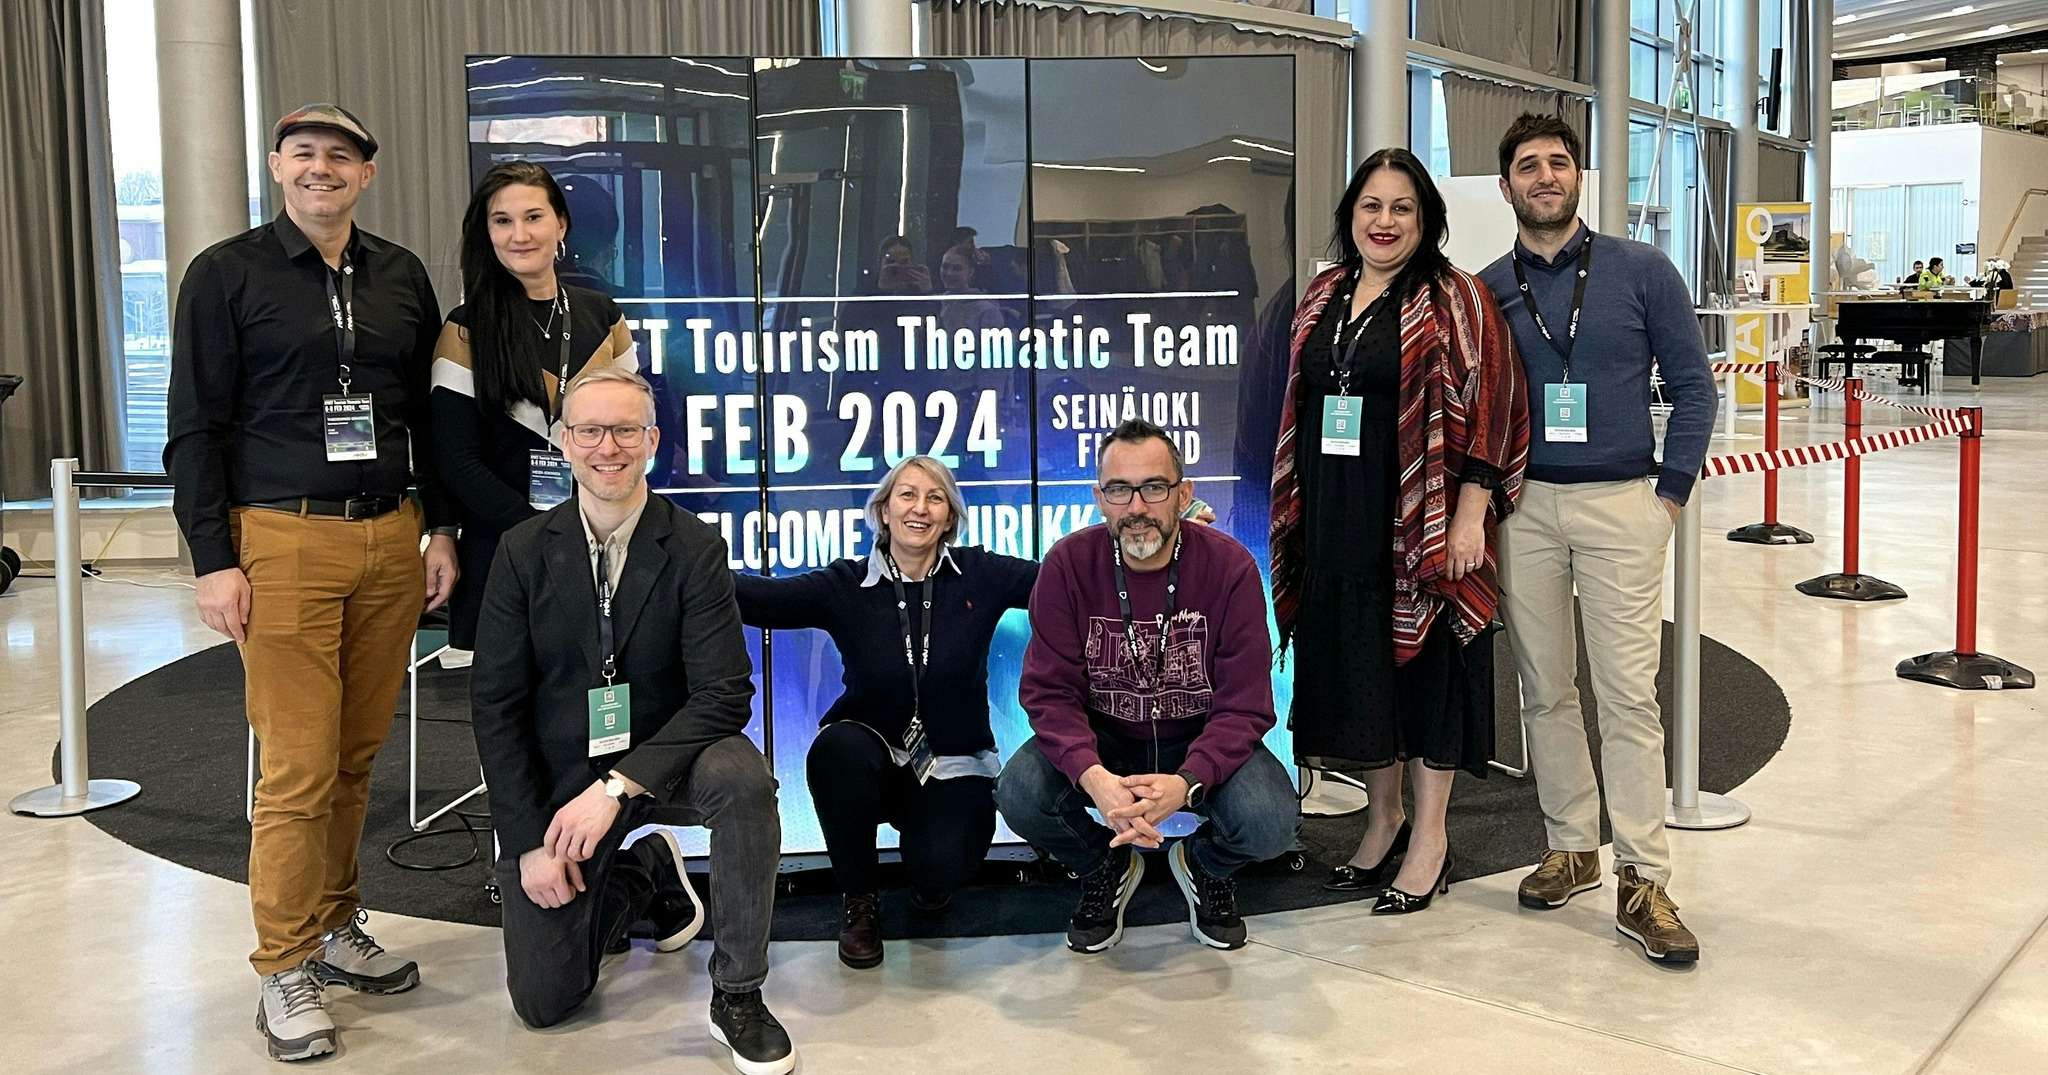 Participation in the TTT Tourism Thematic Group Annual Conference in Finland